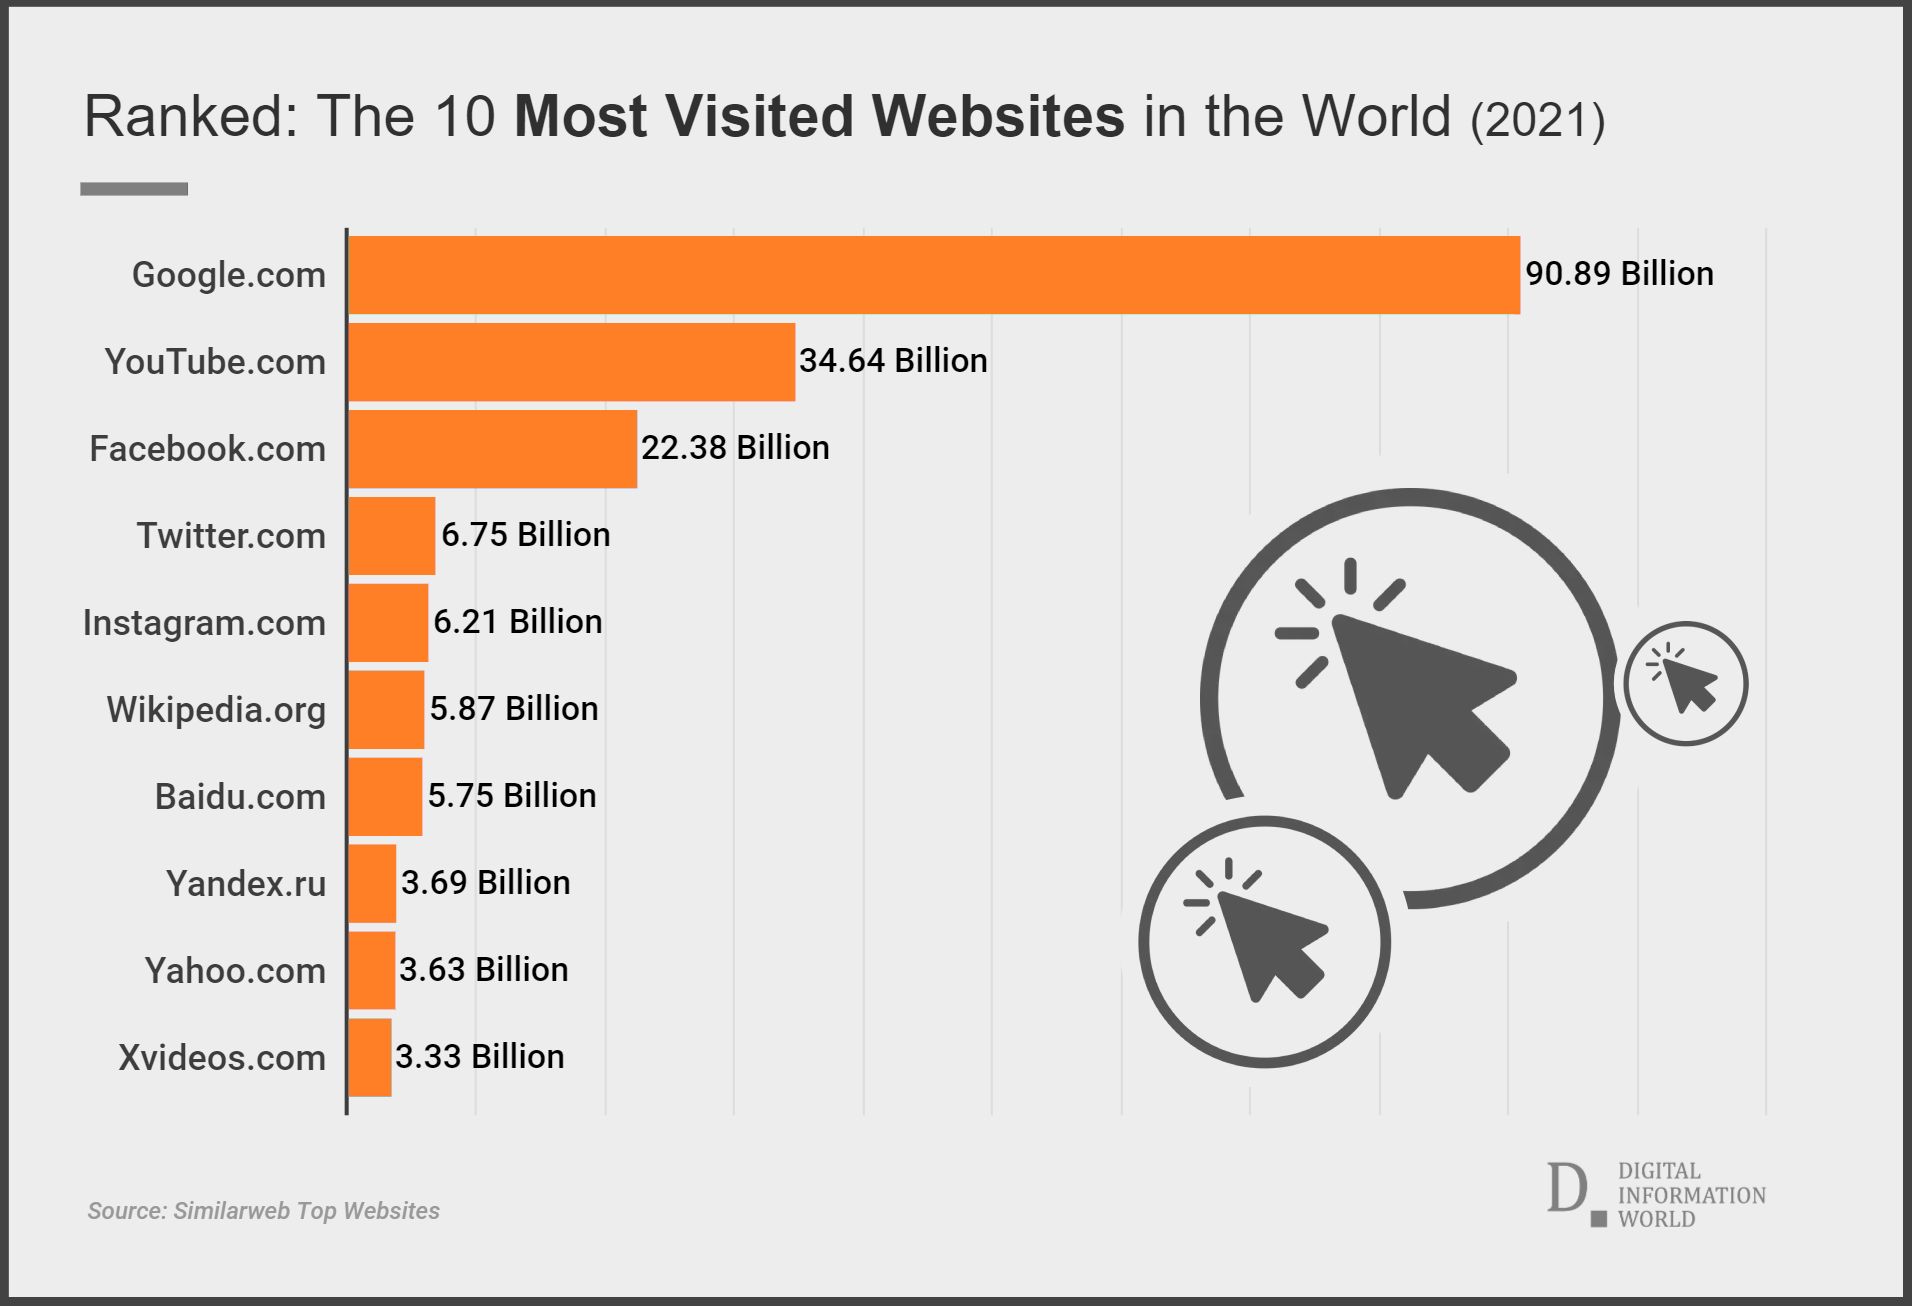 Ranked: The 10 Most Visited Websites in the World